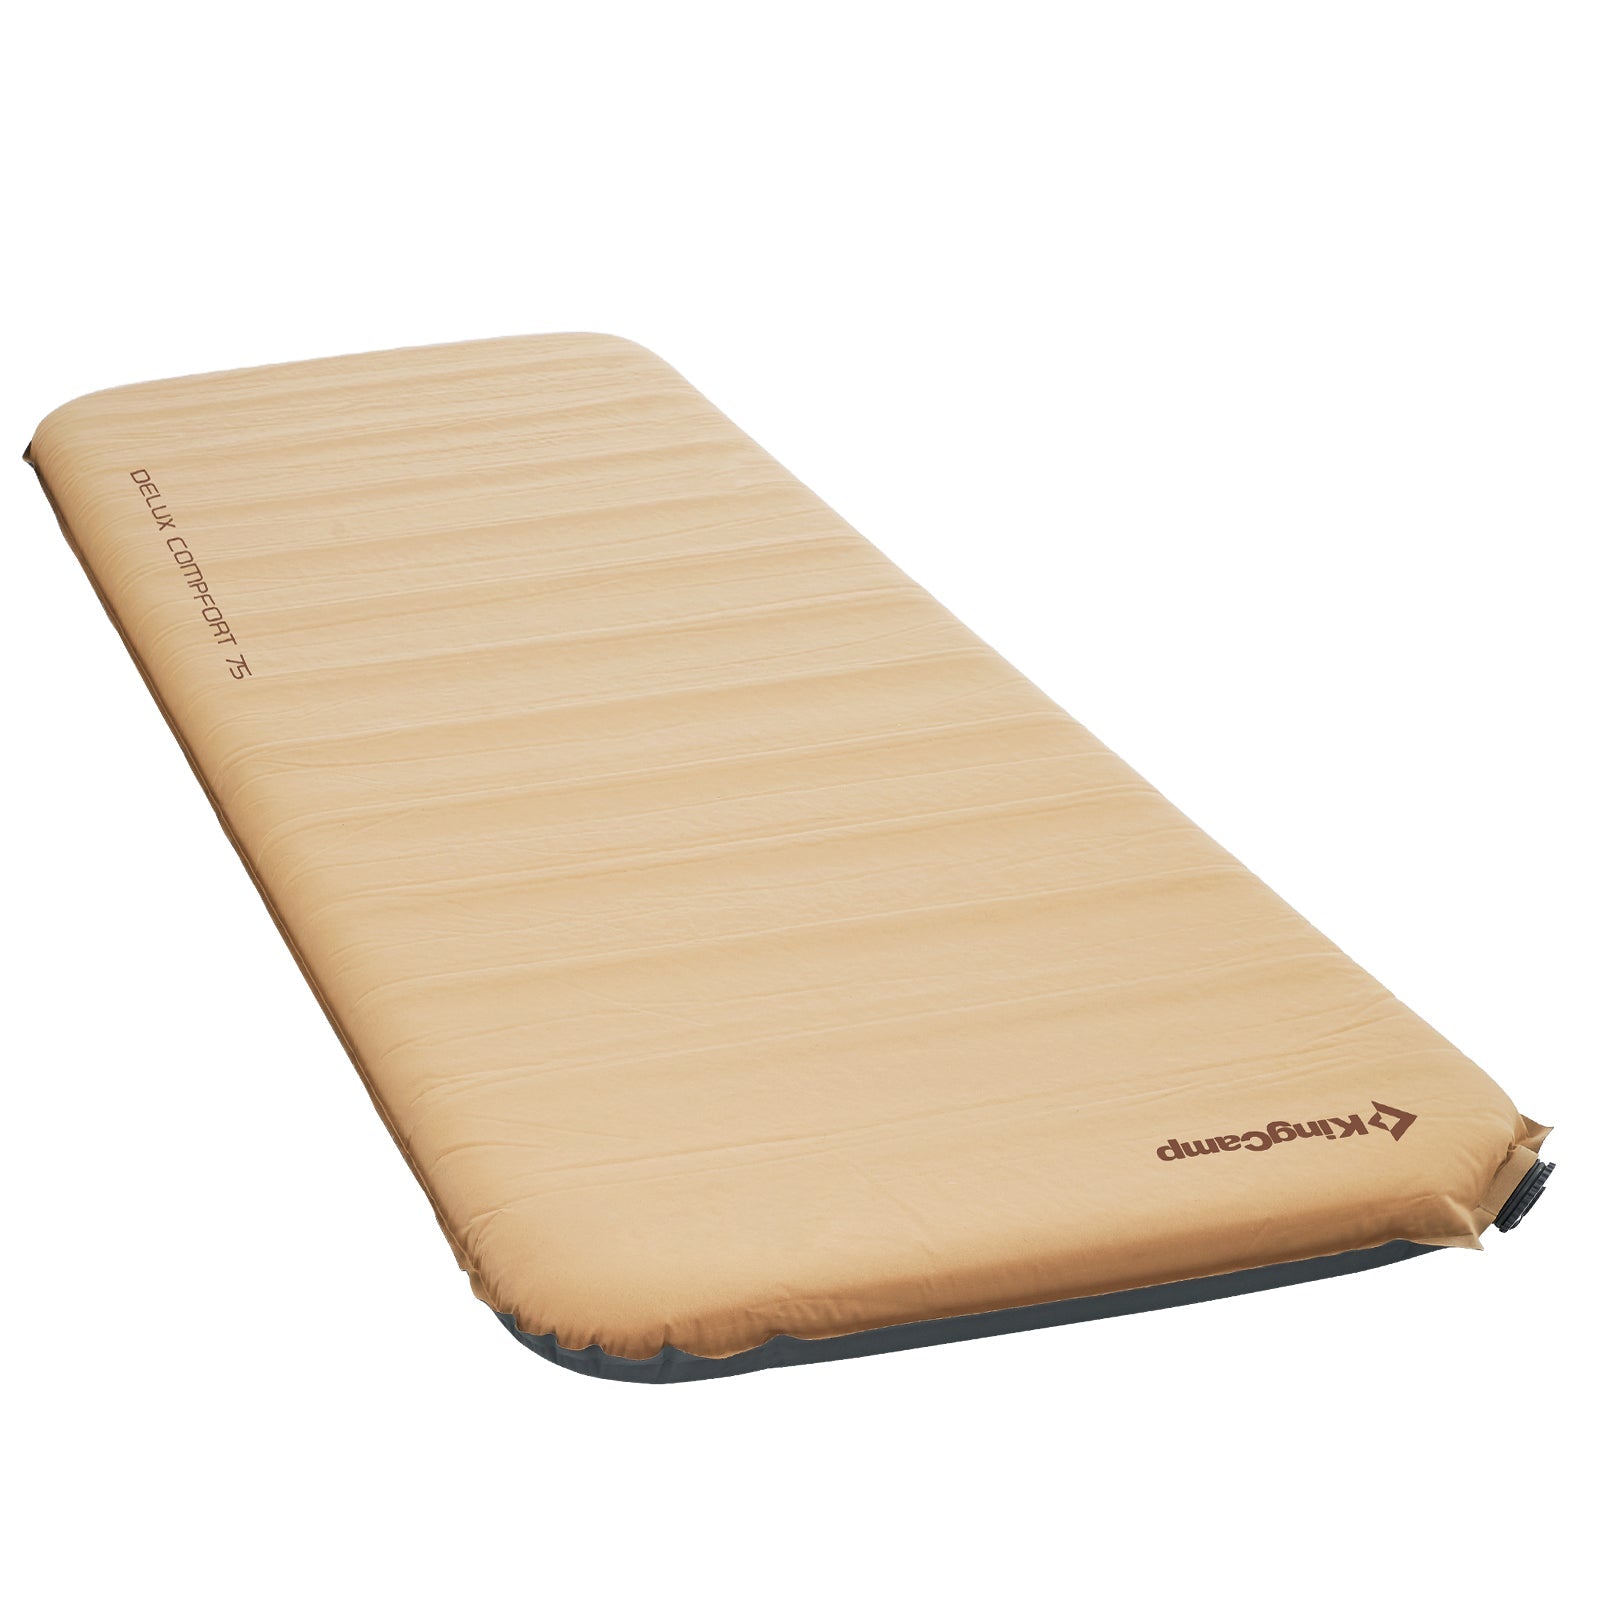 SM 8 Self-inflatable mattress for trekking or camping - Columbus